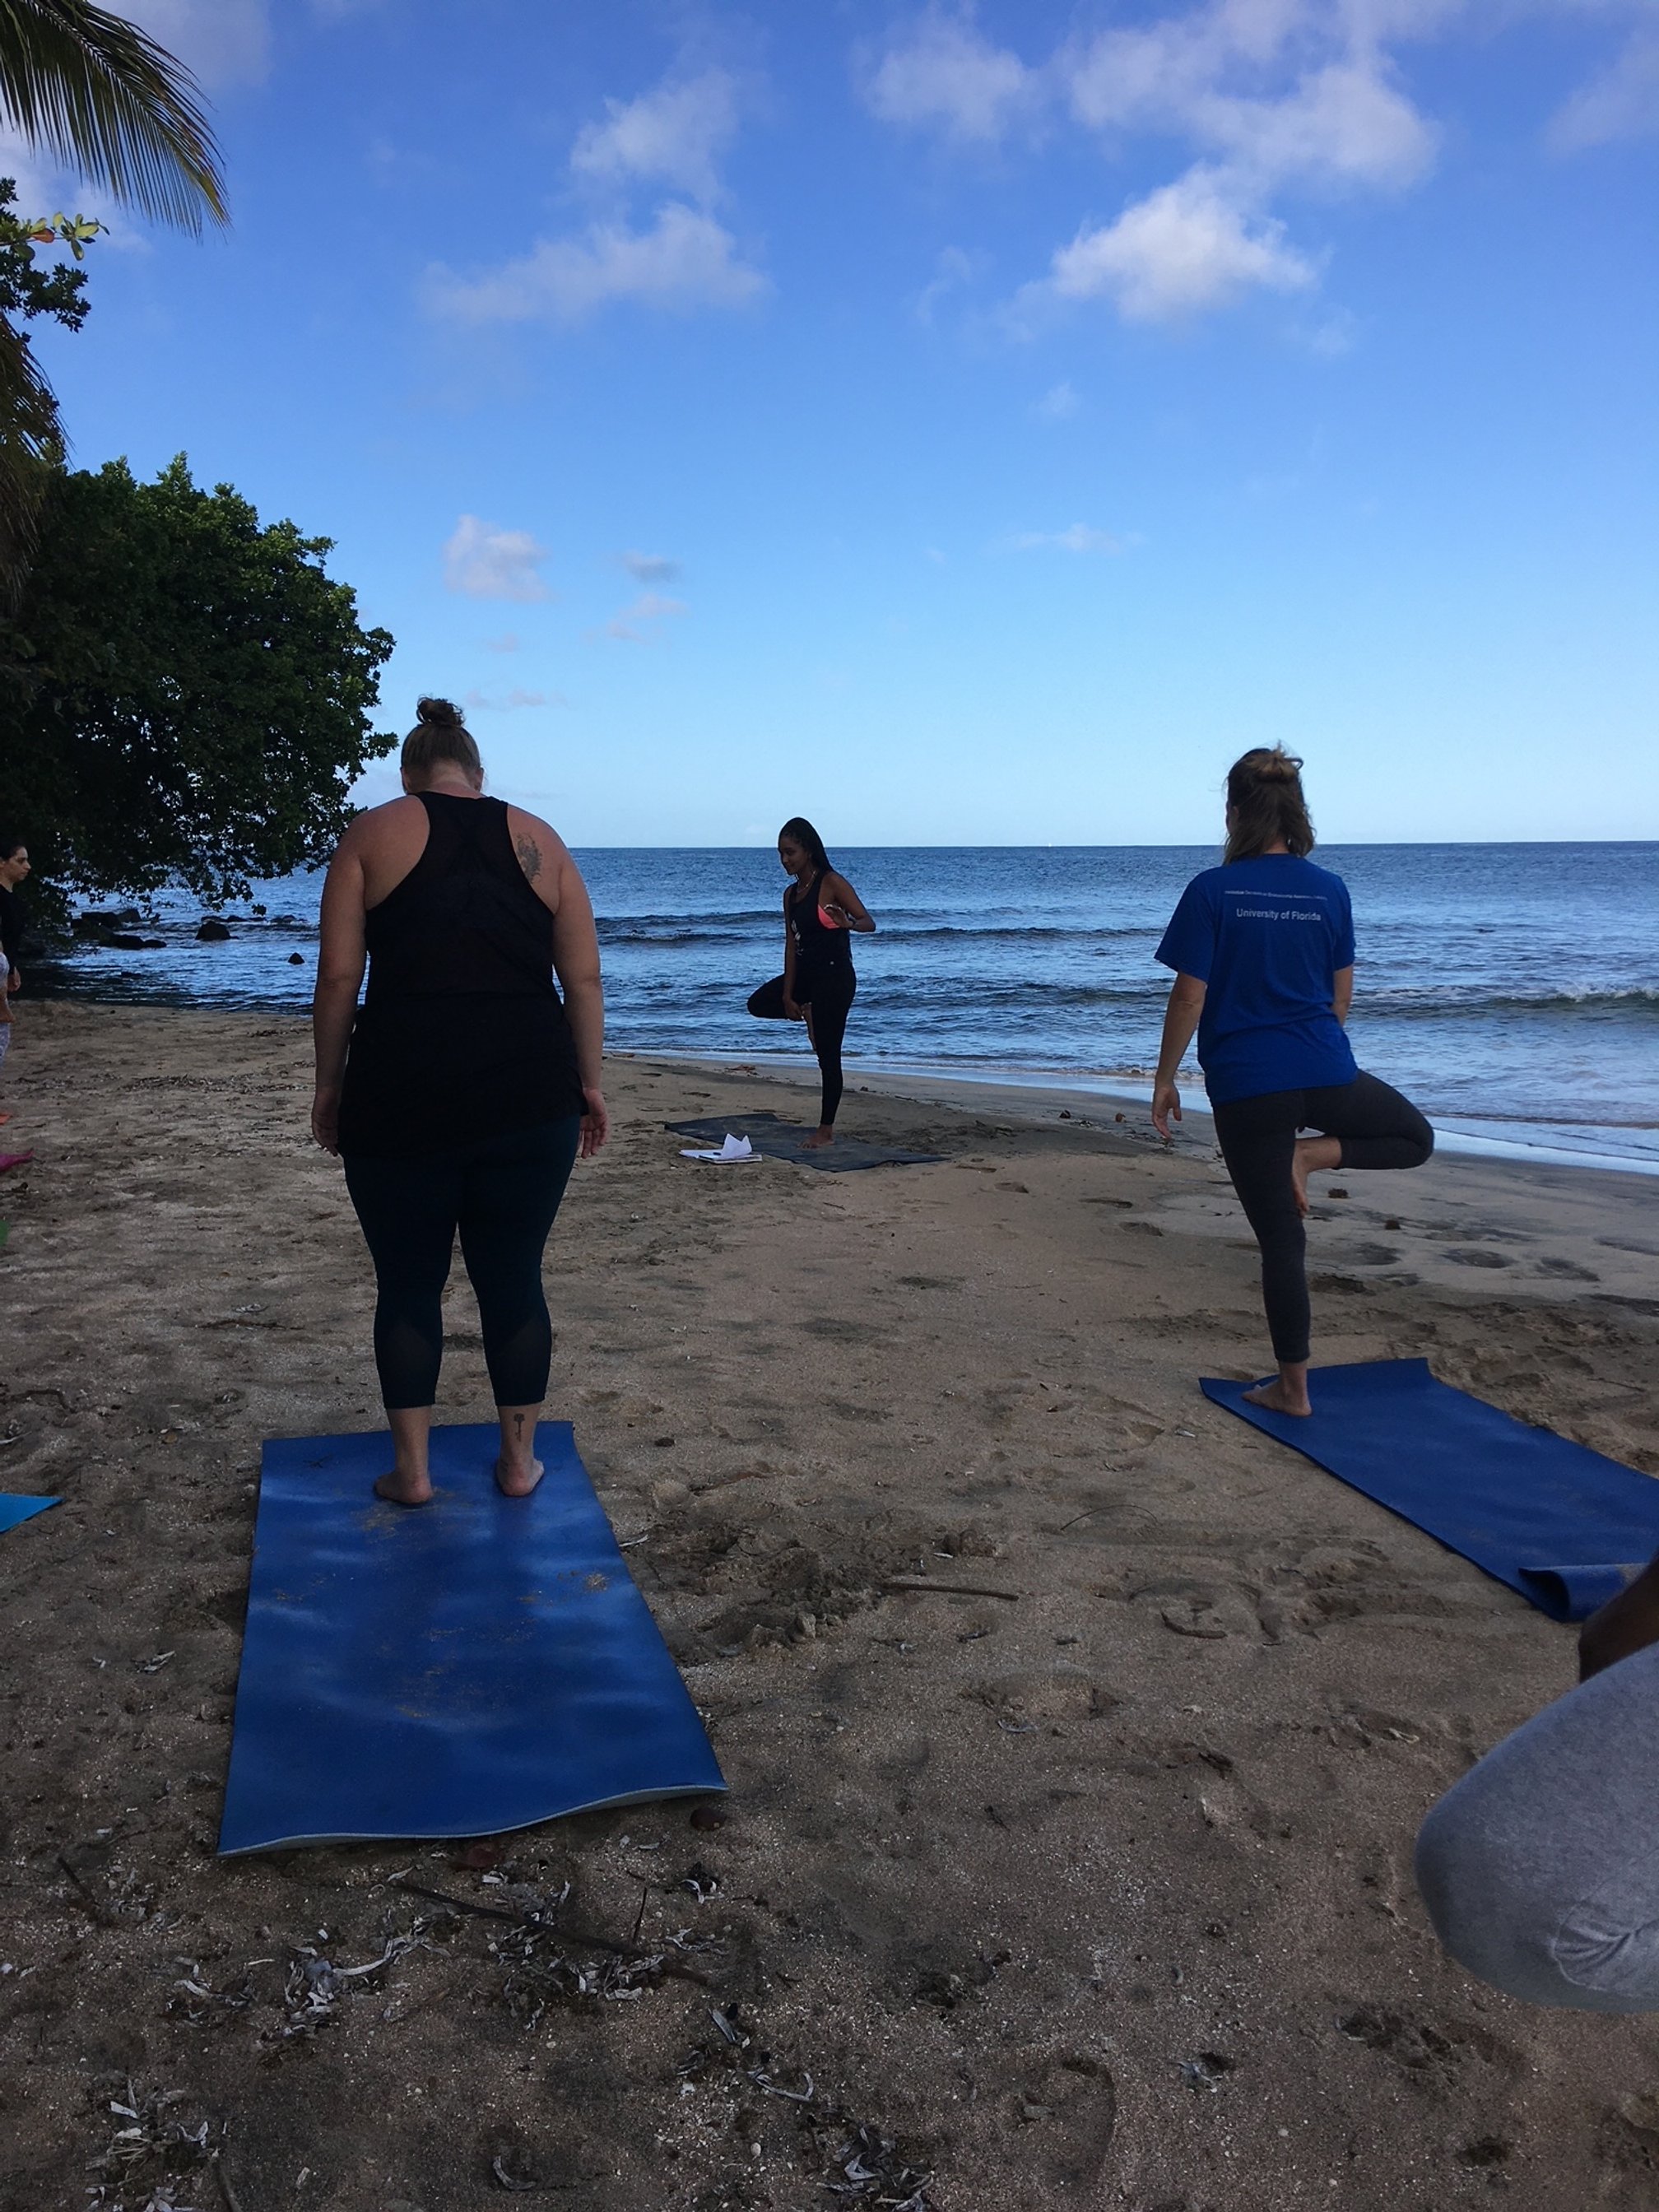 happy-brown-girl-on-the-beach-soka-gyal-march-14-2020-standing-yoga-in-st-vincent-and-the-grenadines.JPG